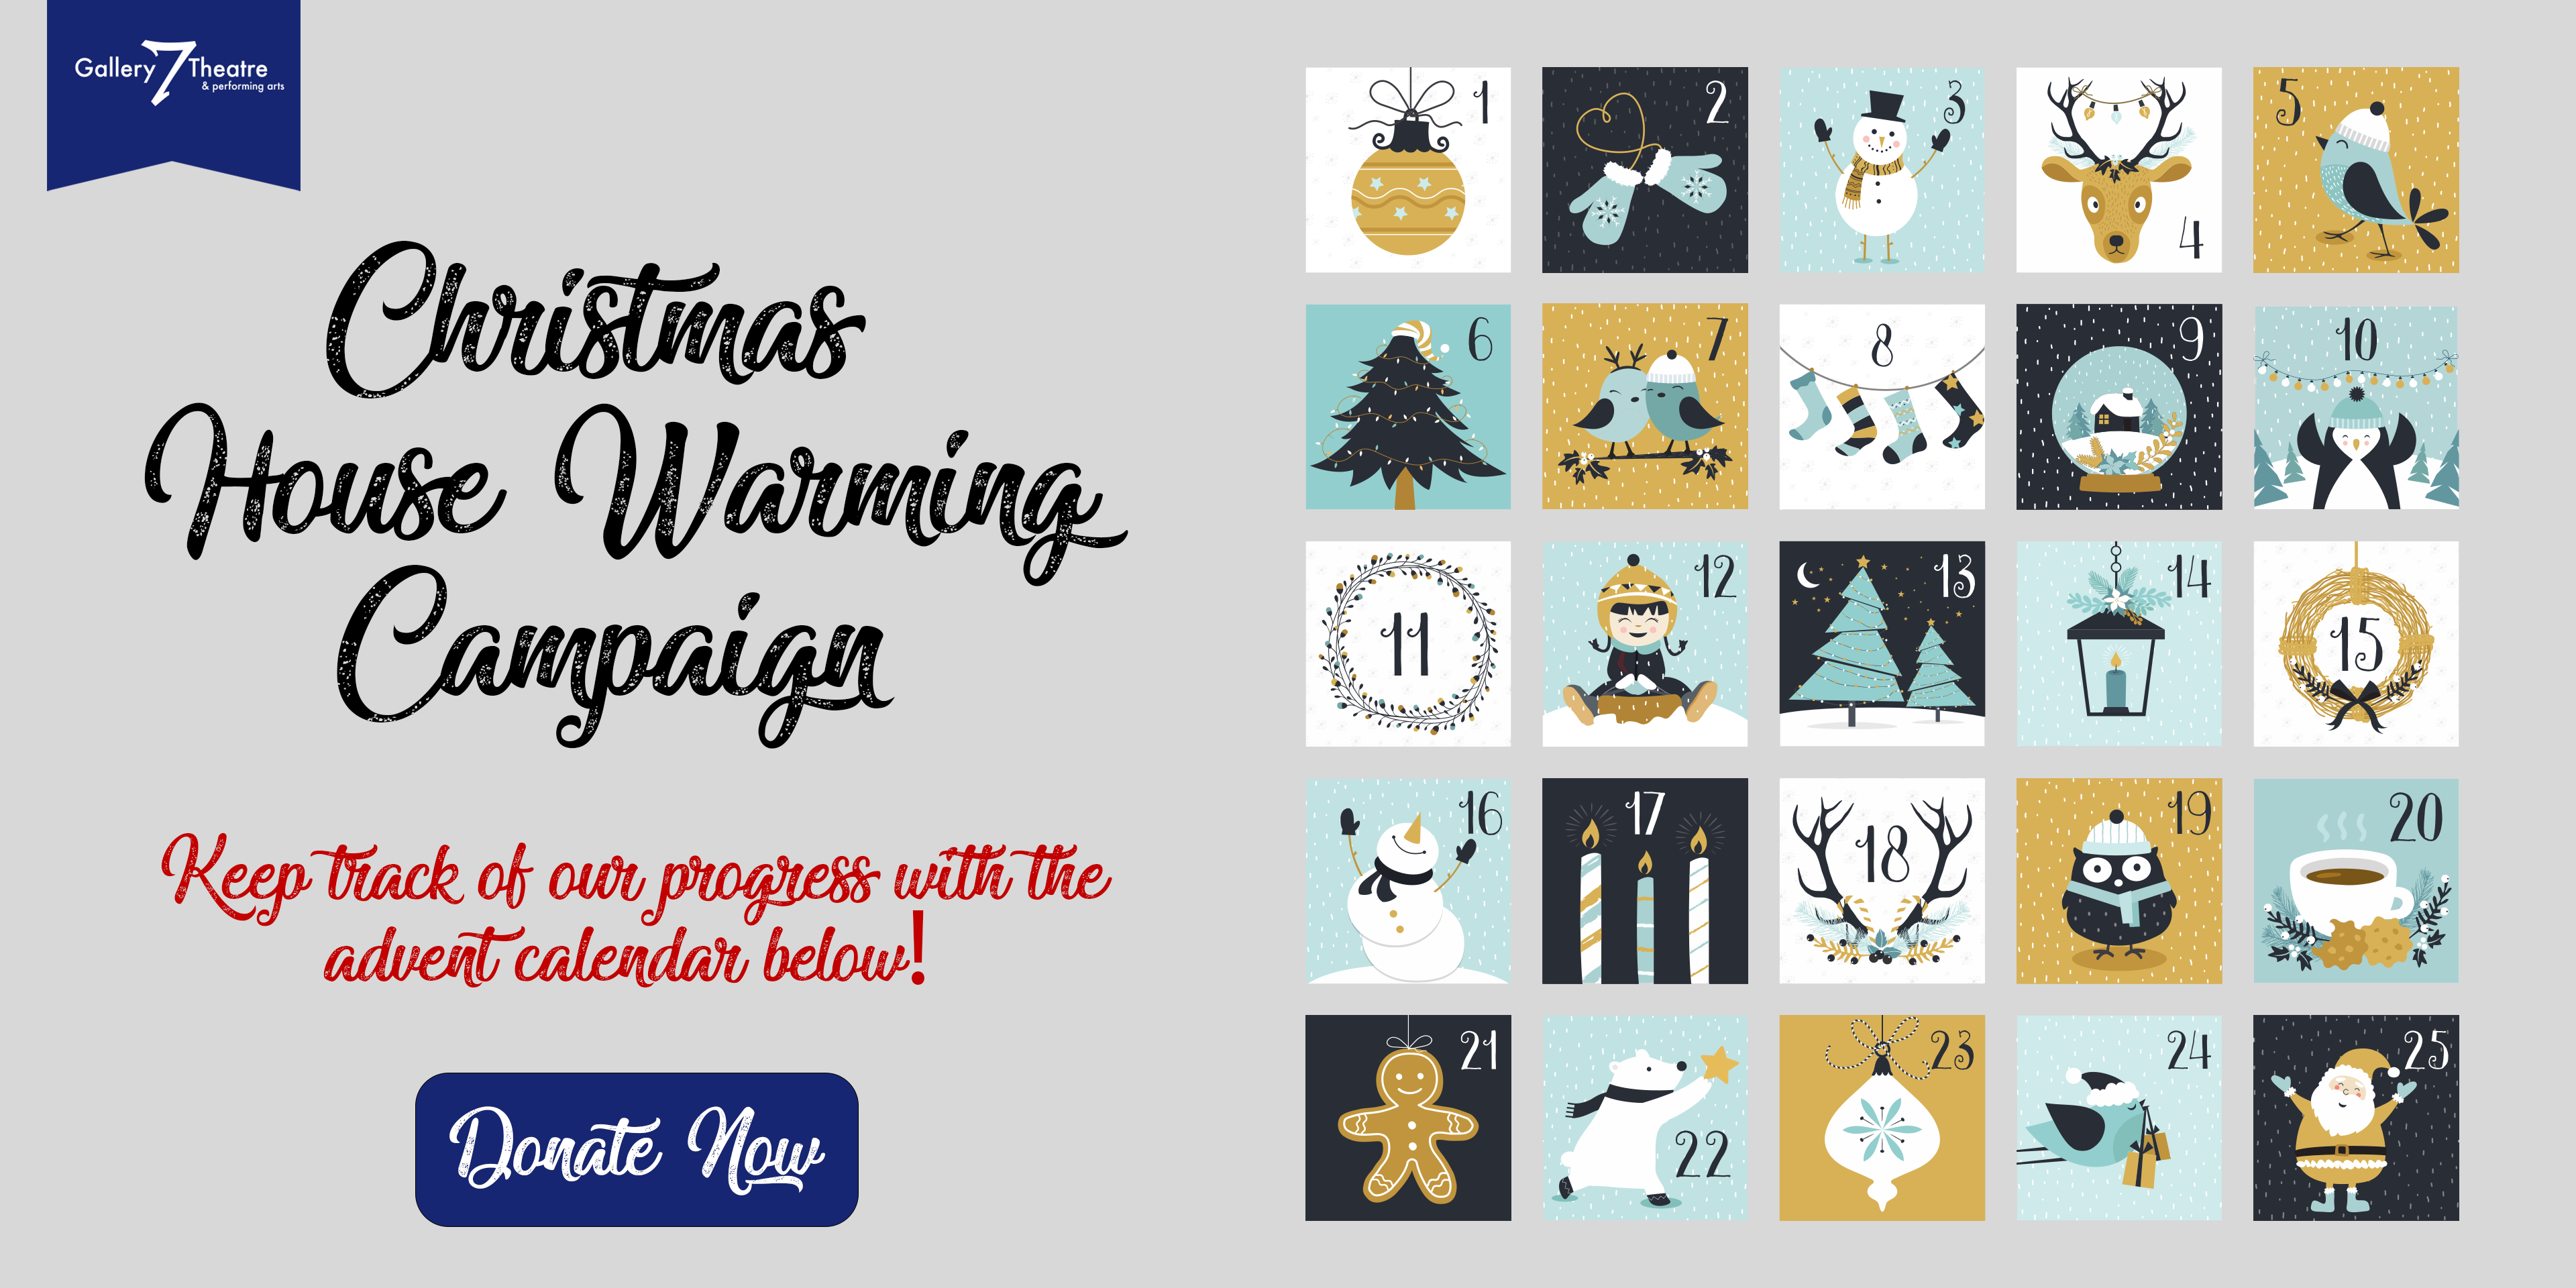 Christmas House-Warming Campaign: an advent calendar graphic with a donate now button